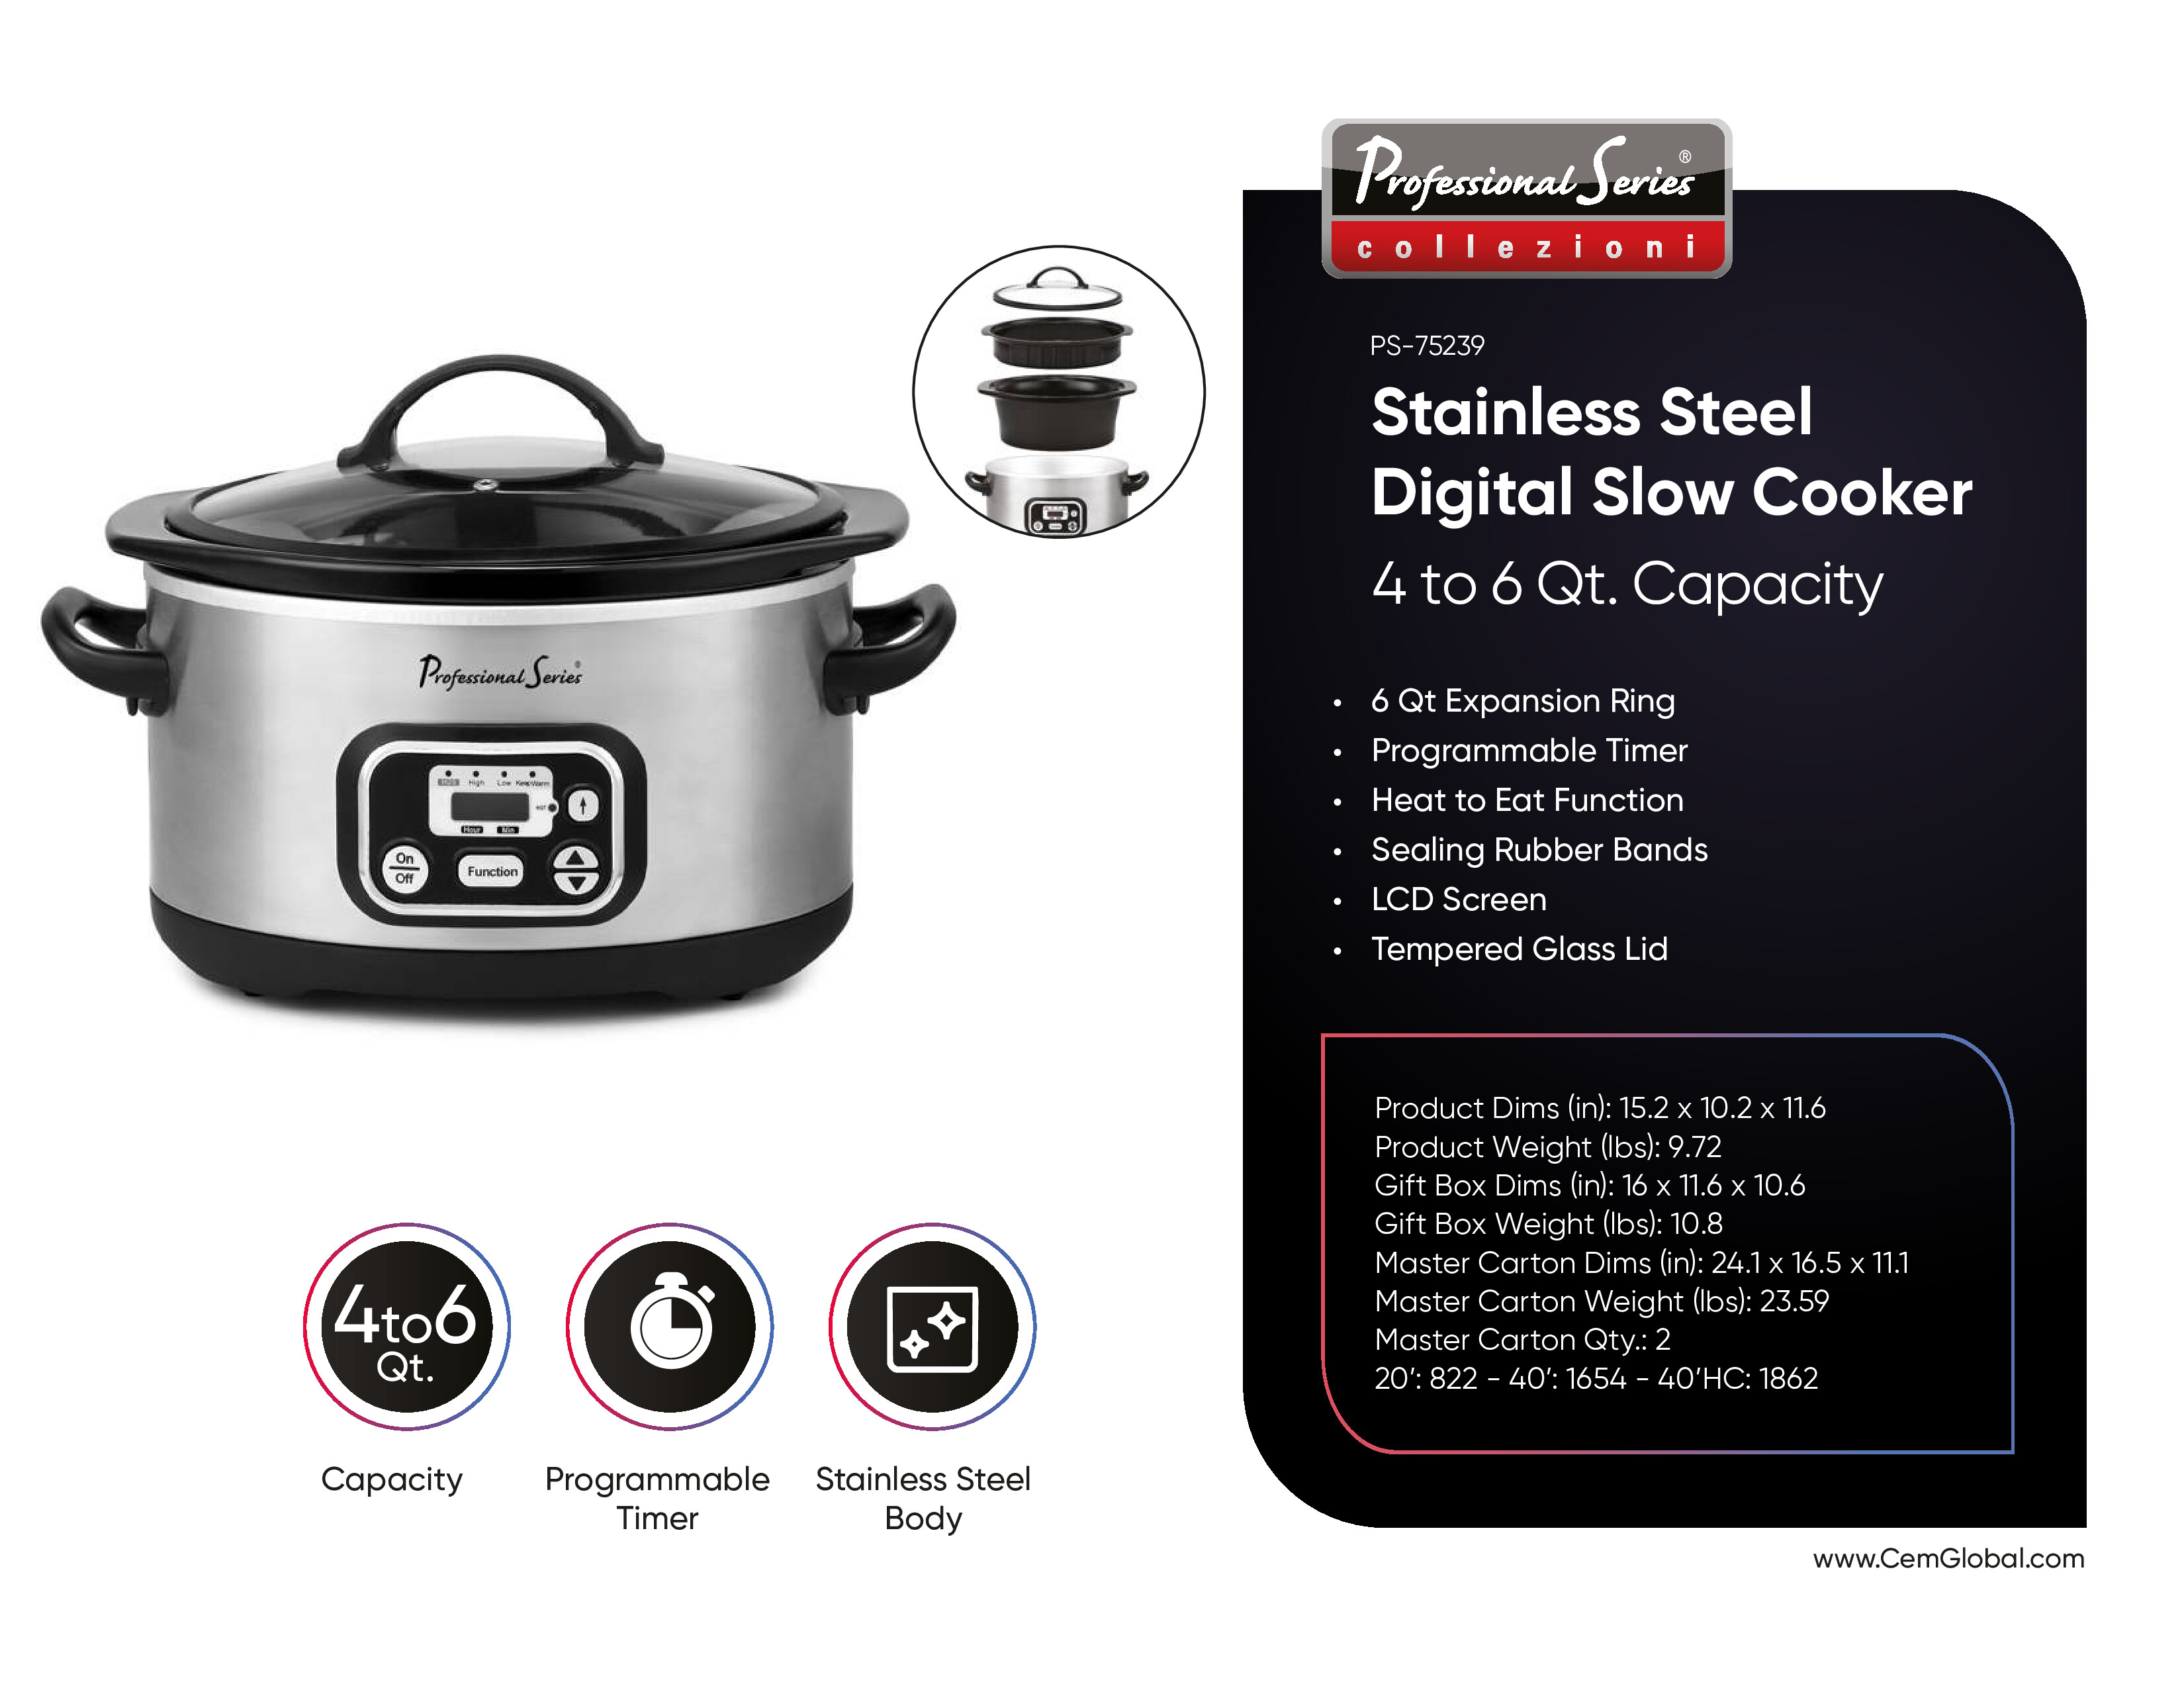 Digital Slow Cooker, Oval, 4-6 Qt, Stainless Steel